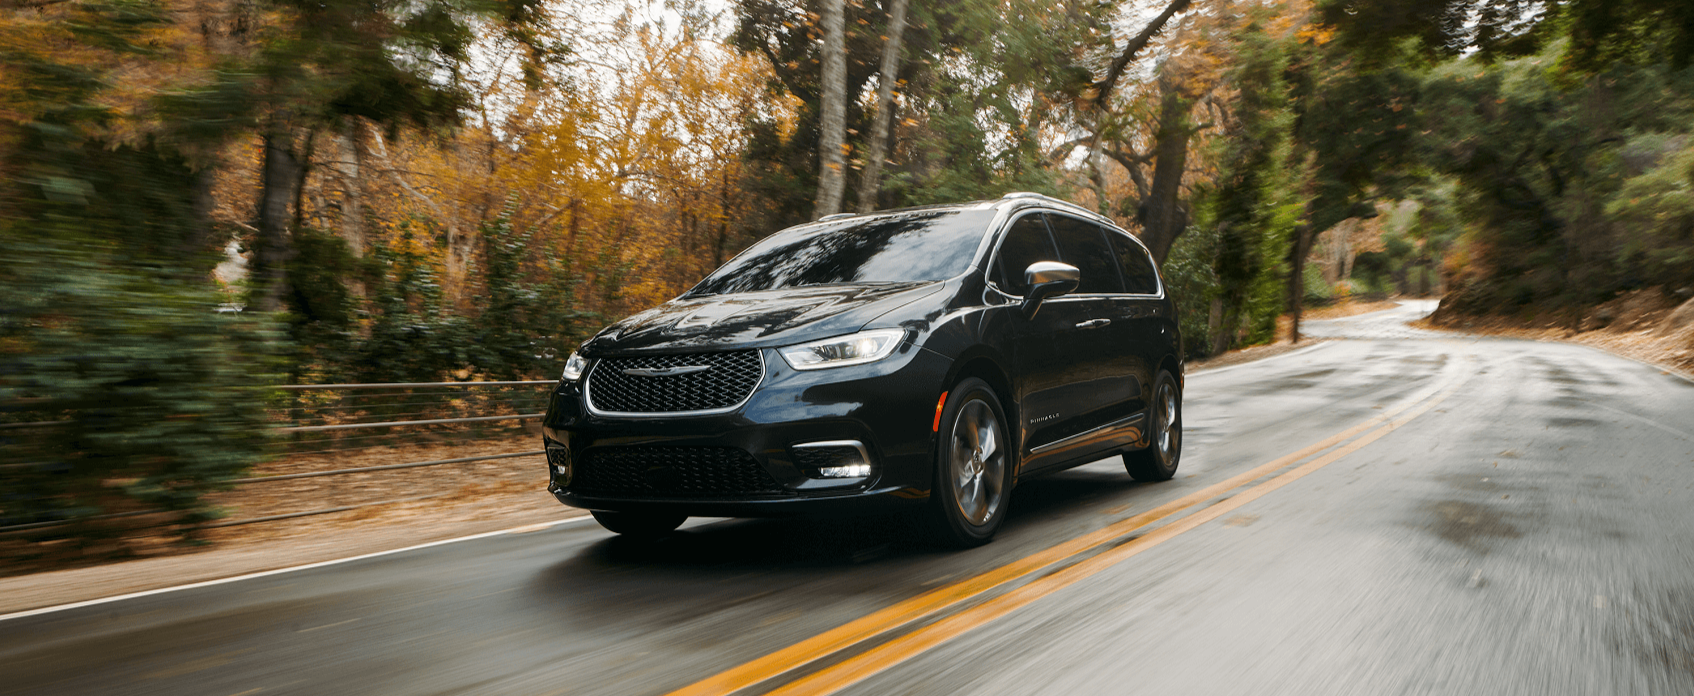 Used Chrysler Pacifica for Sale Mt. Airy MD